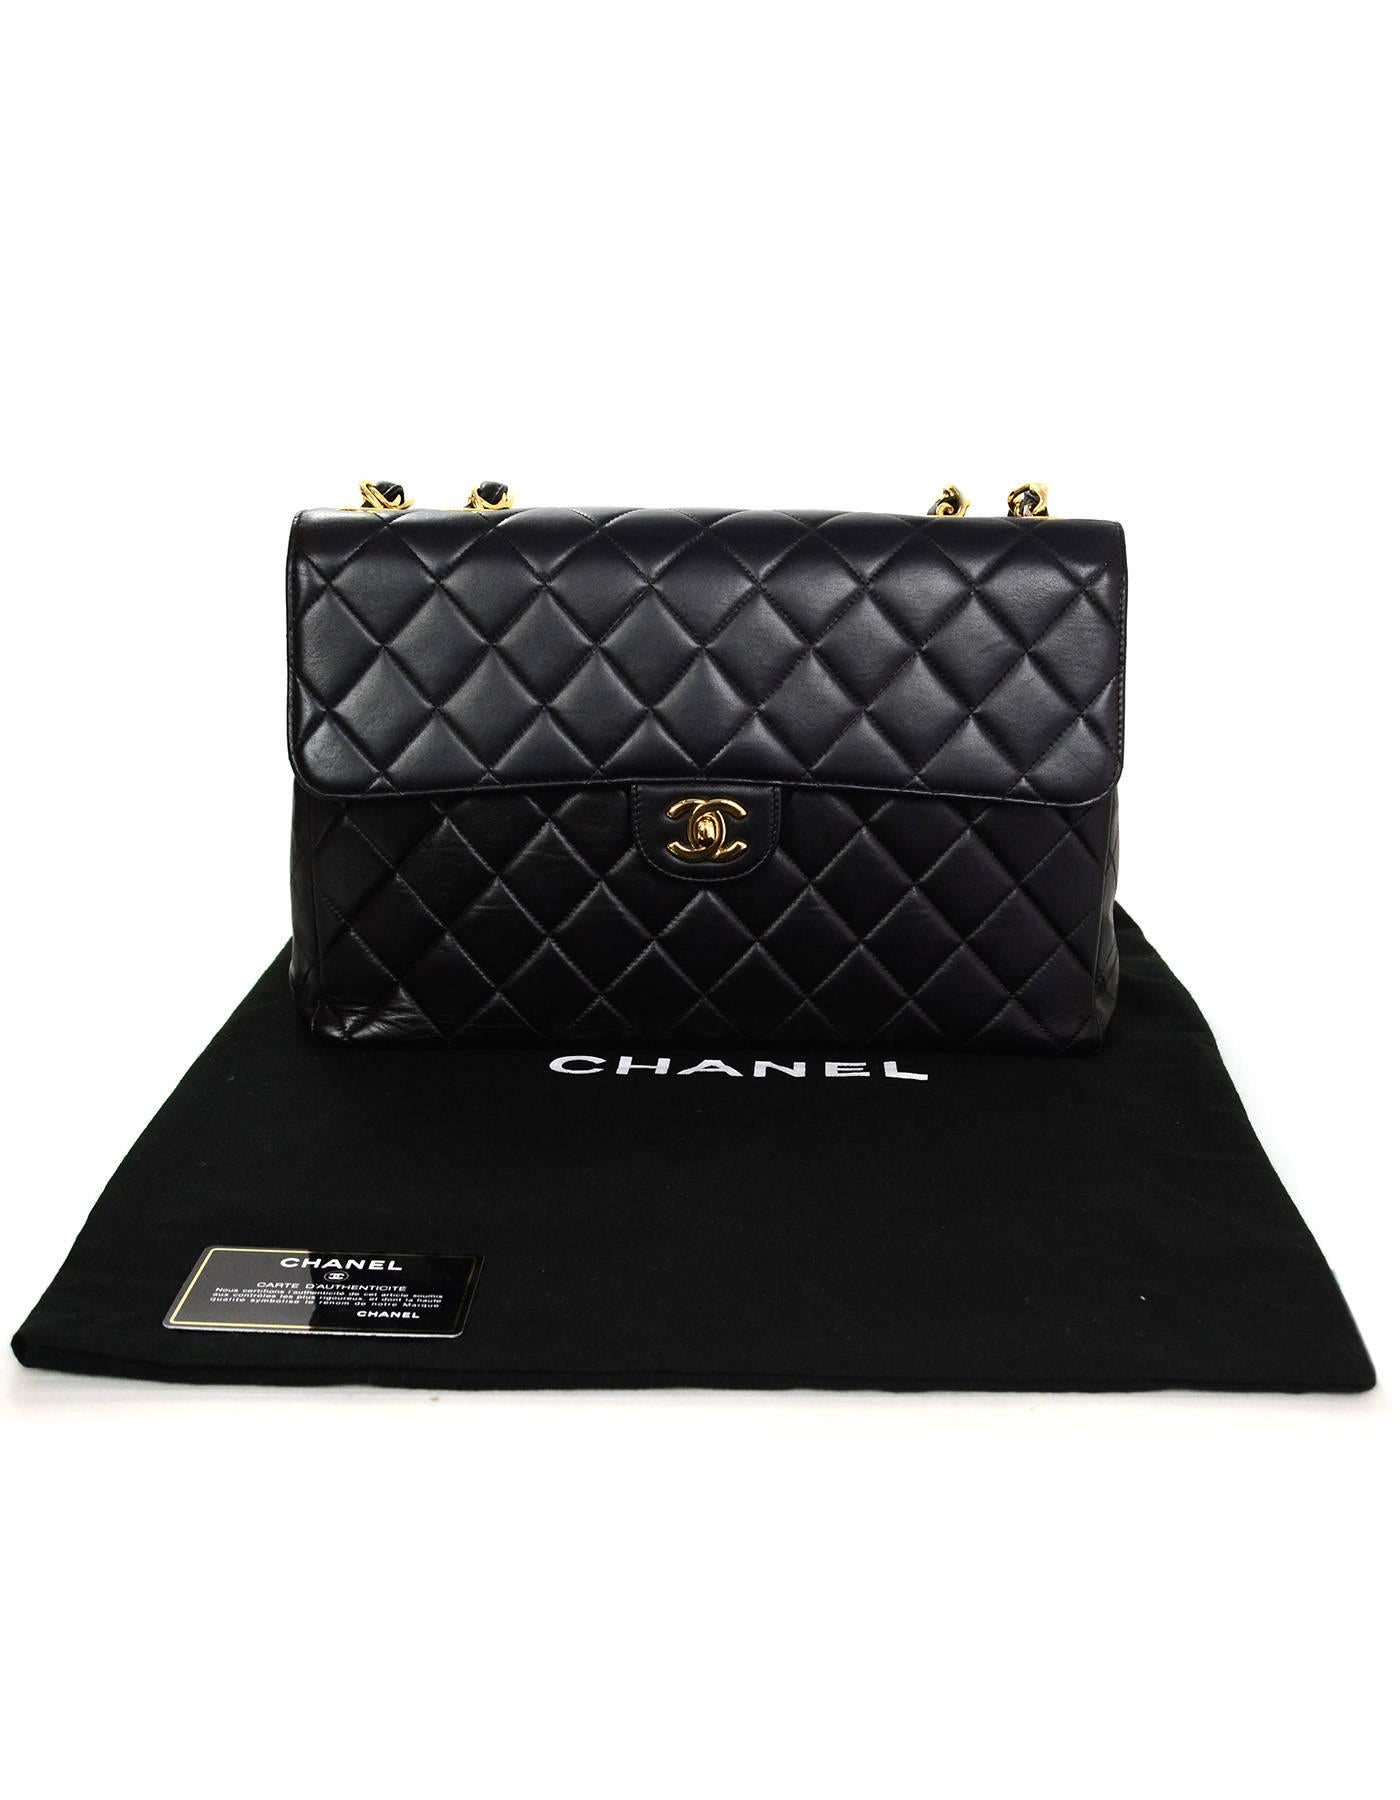 Chanel Black Lambskin Leather Quilted Classic Jumbo Single Flap Bag 4